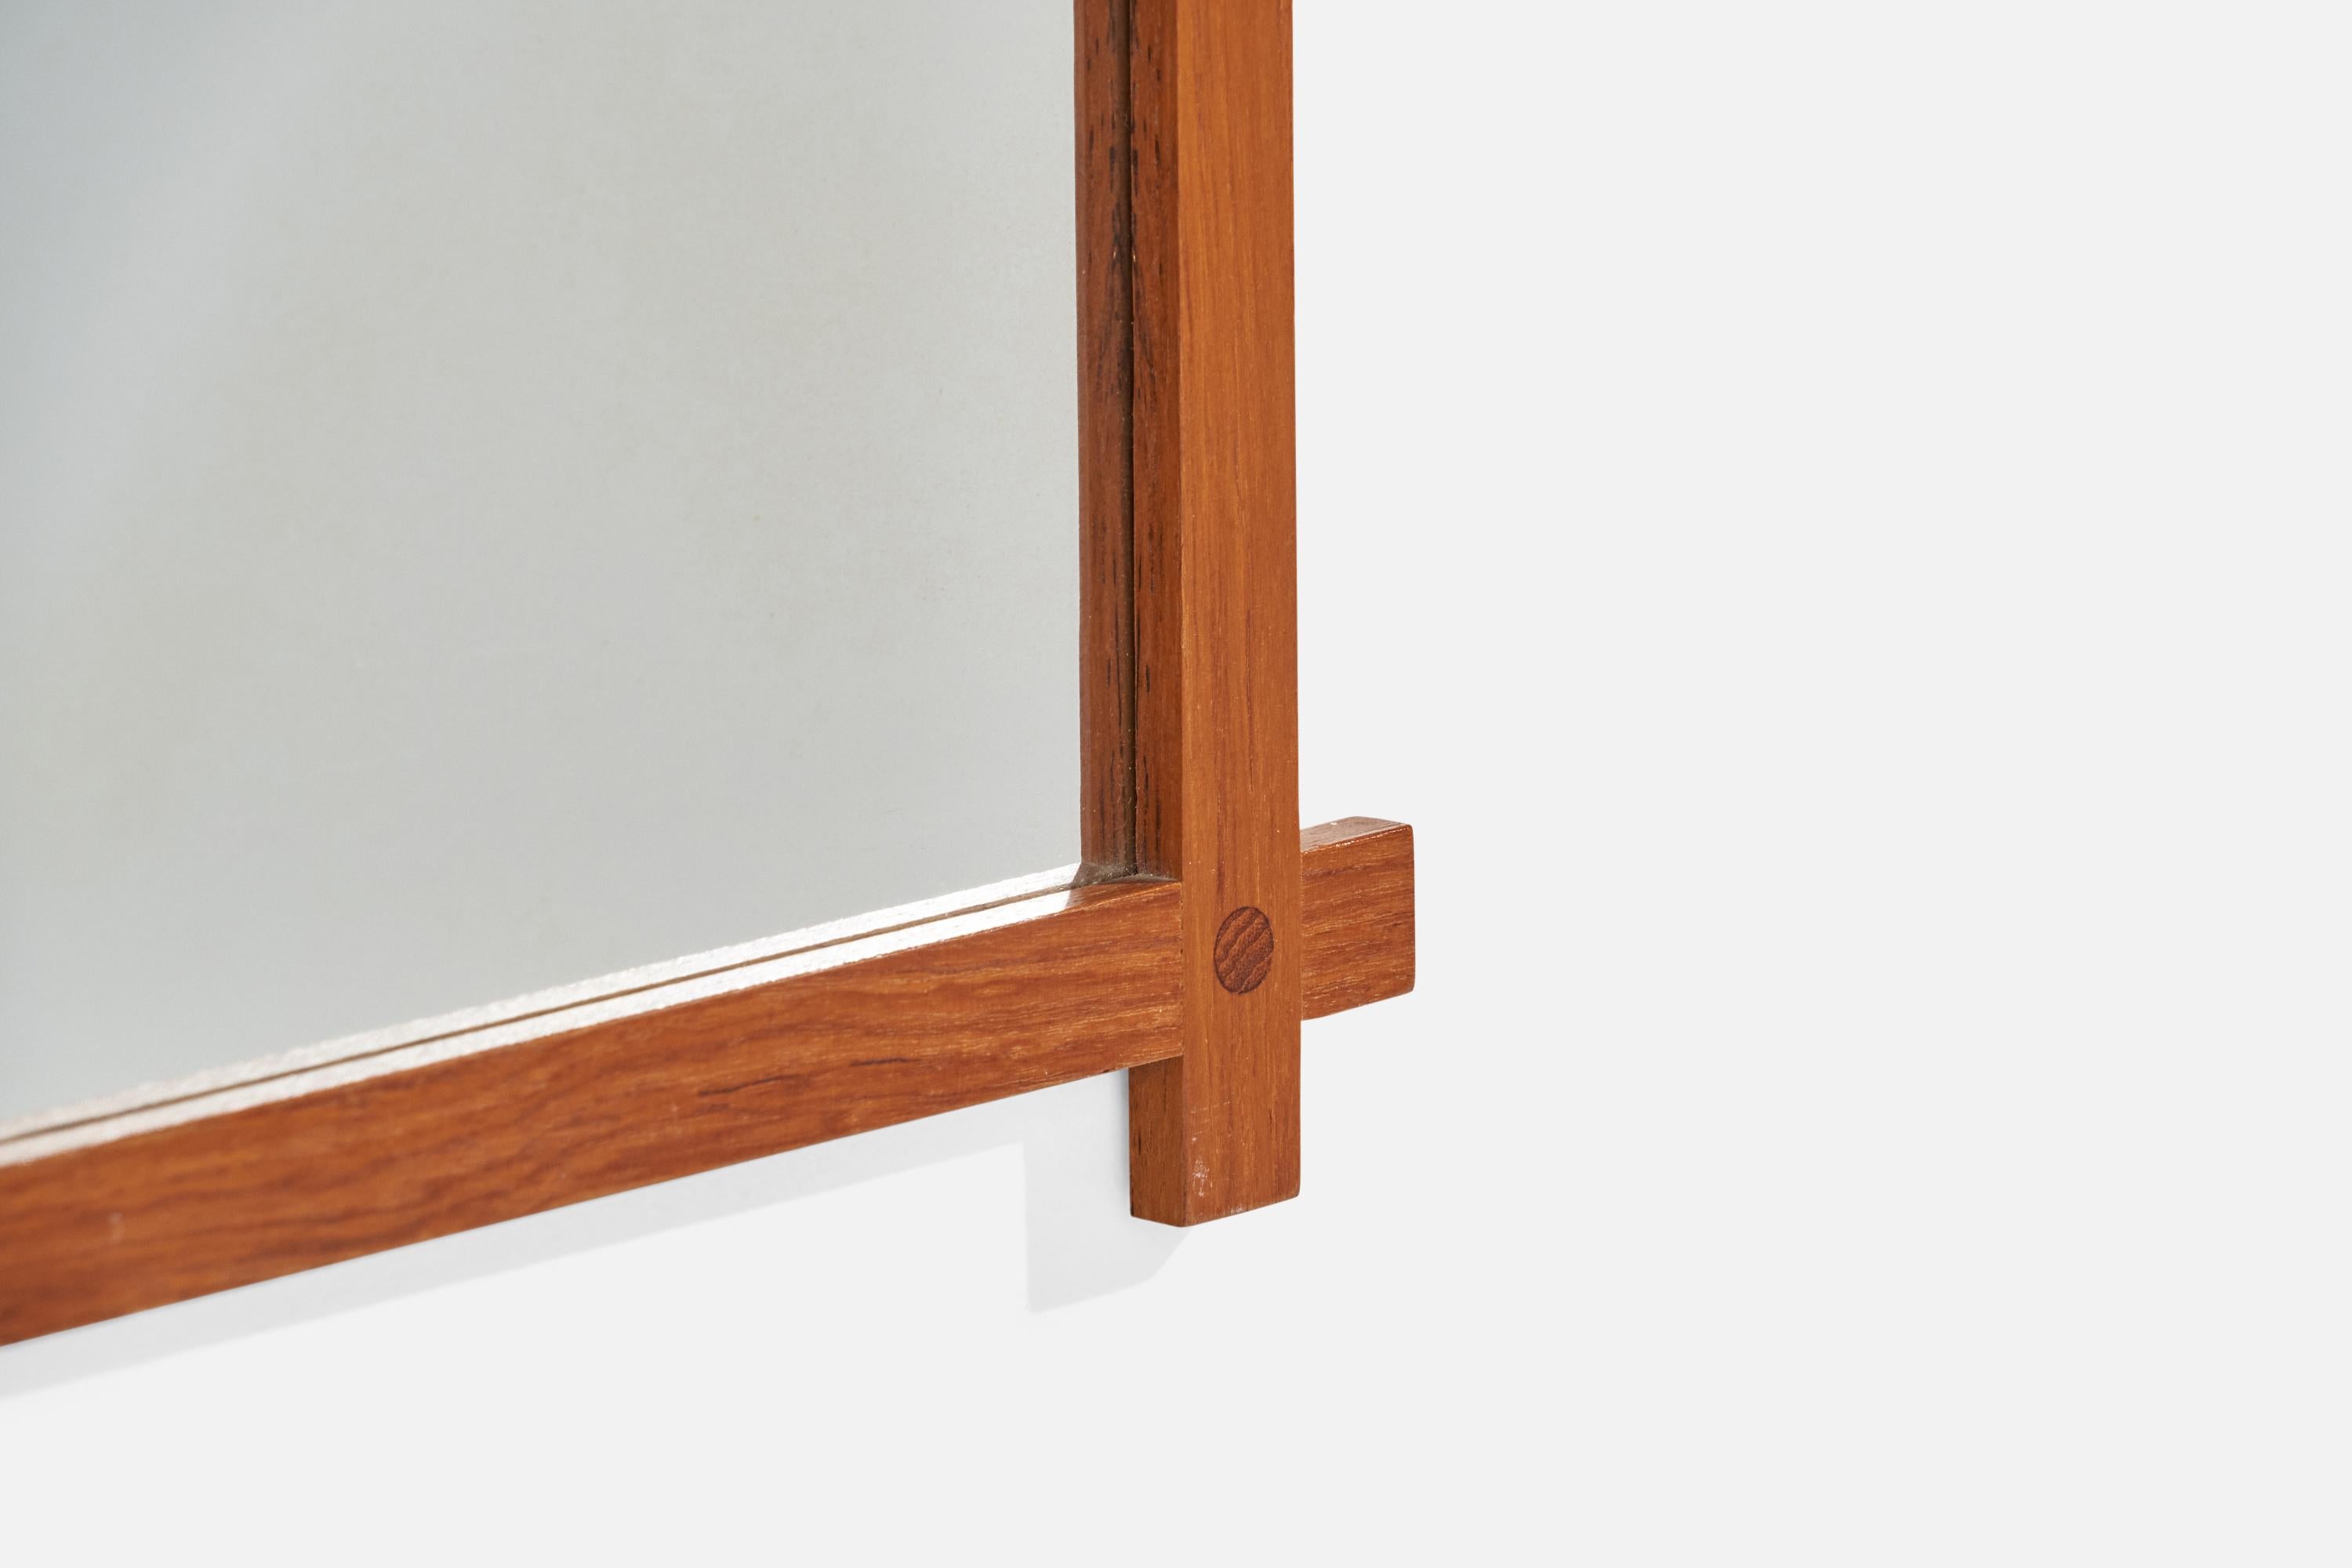 Fröseke, Ab Nybrofabriken, Wall Mirror, Solid Teak, Leather, Mirror Glass, 1960s For Sale 1